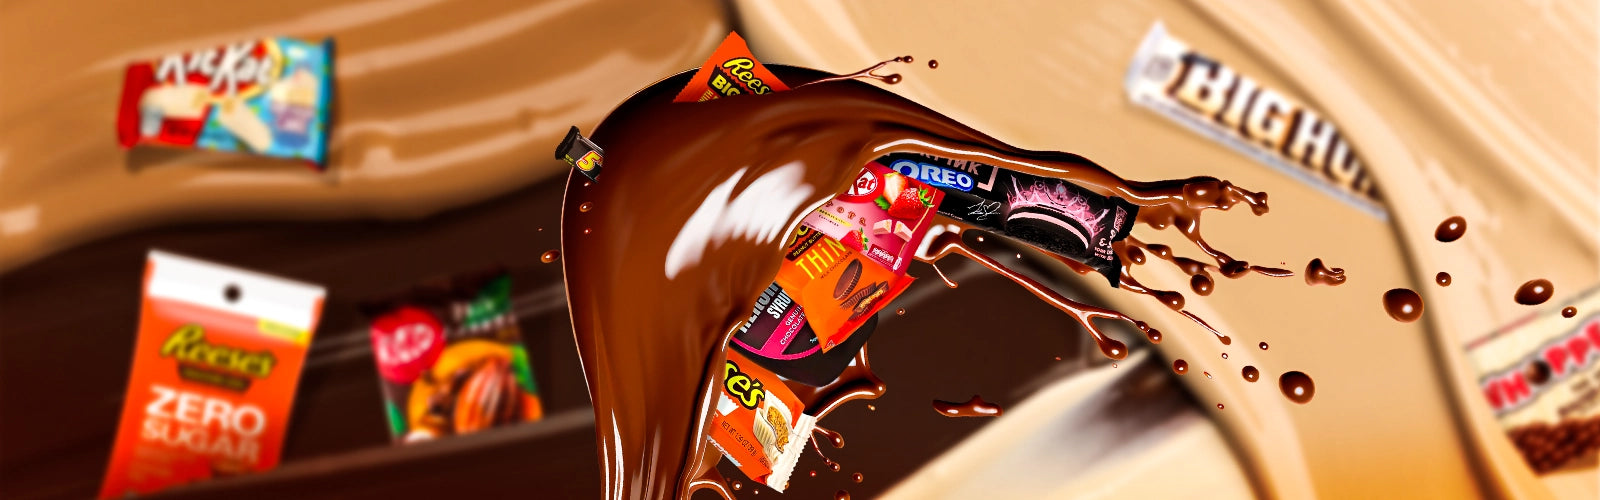 all chocolate products banner